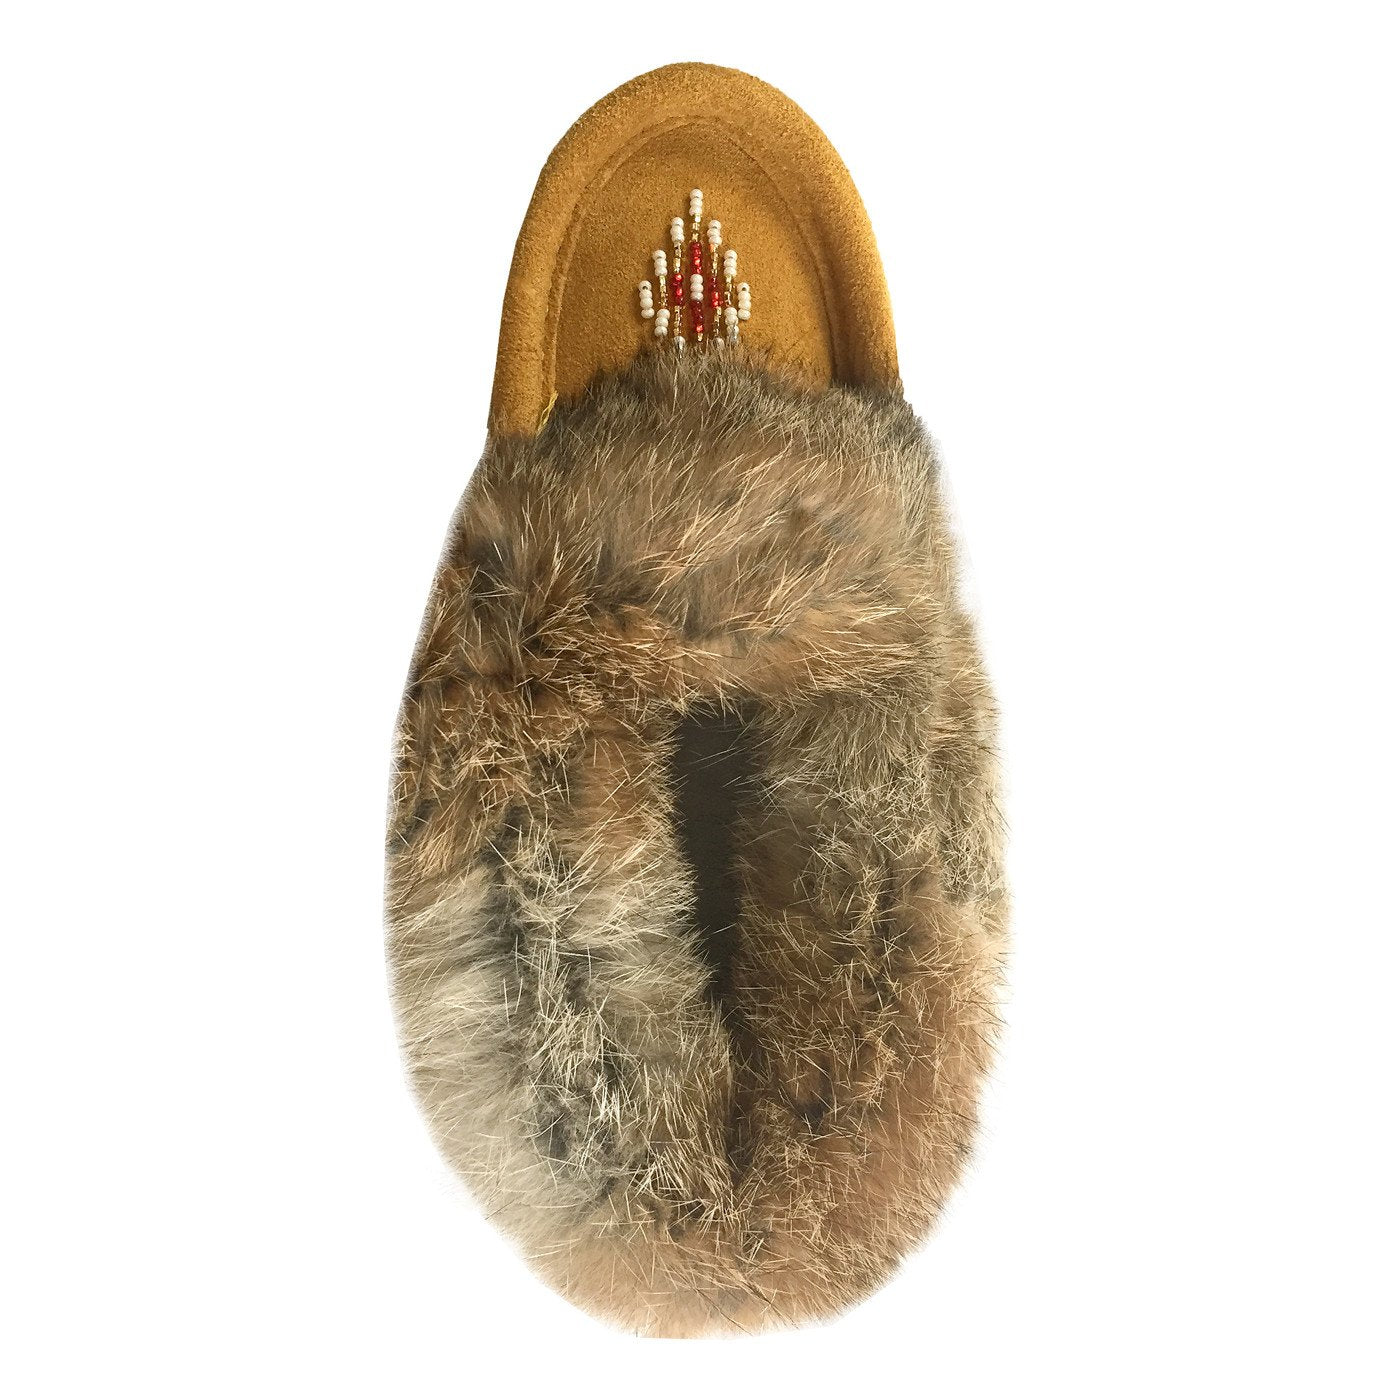 Children's Lined Rabbit Fur Indian Tan Beaded Moccasins